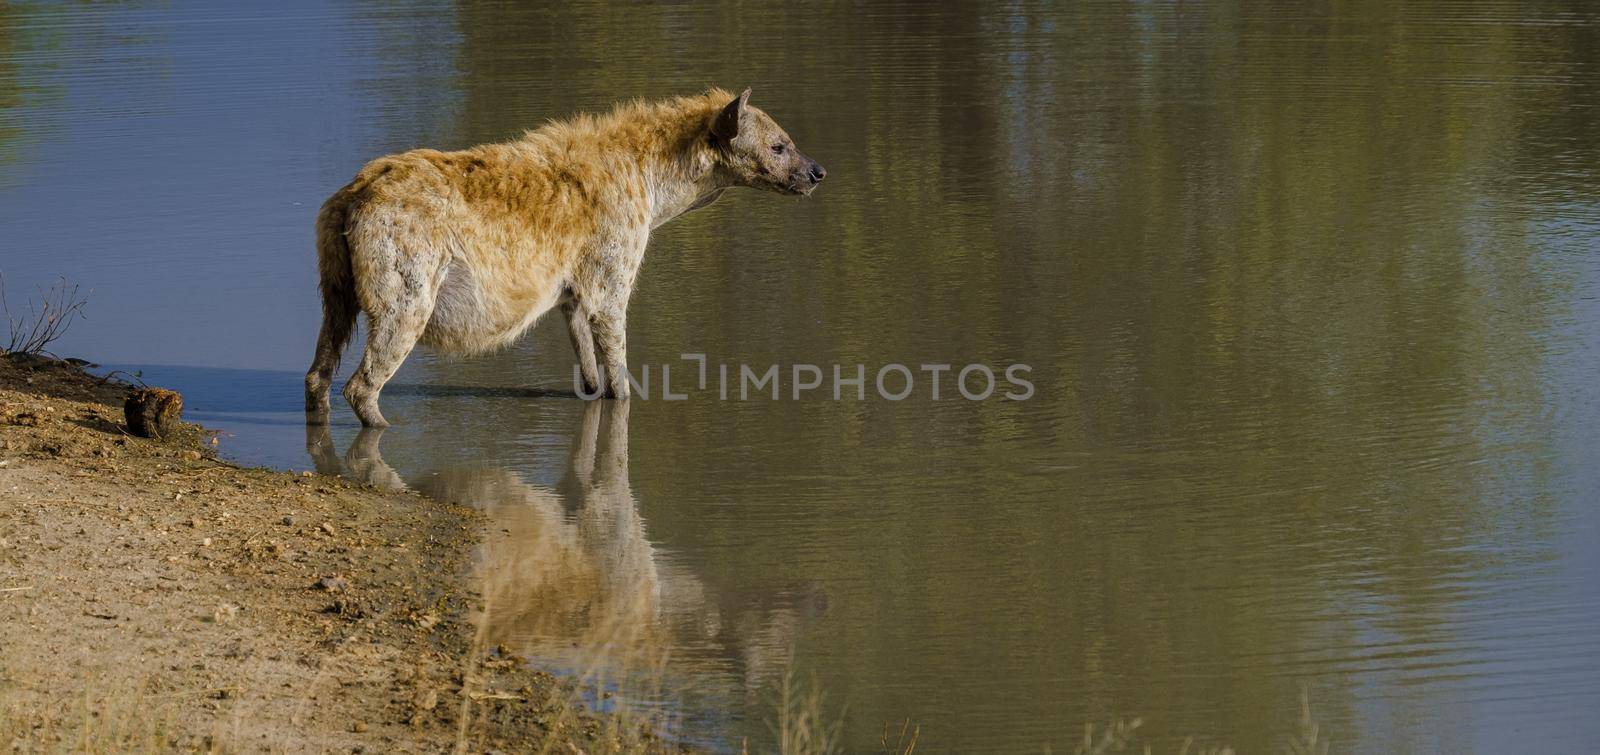 Pregnant Hyena in water lake with reflection at Kruger National park South Africa by fokkebok